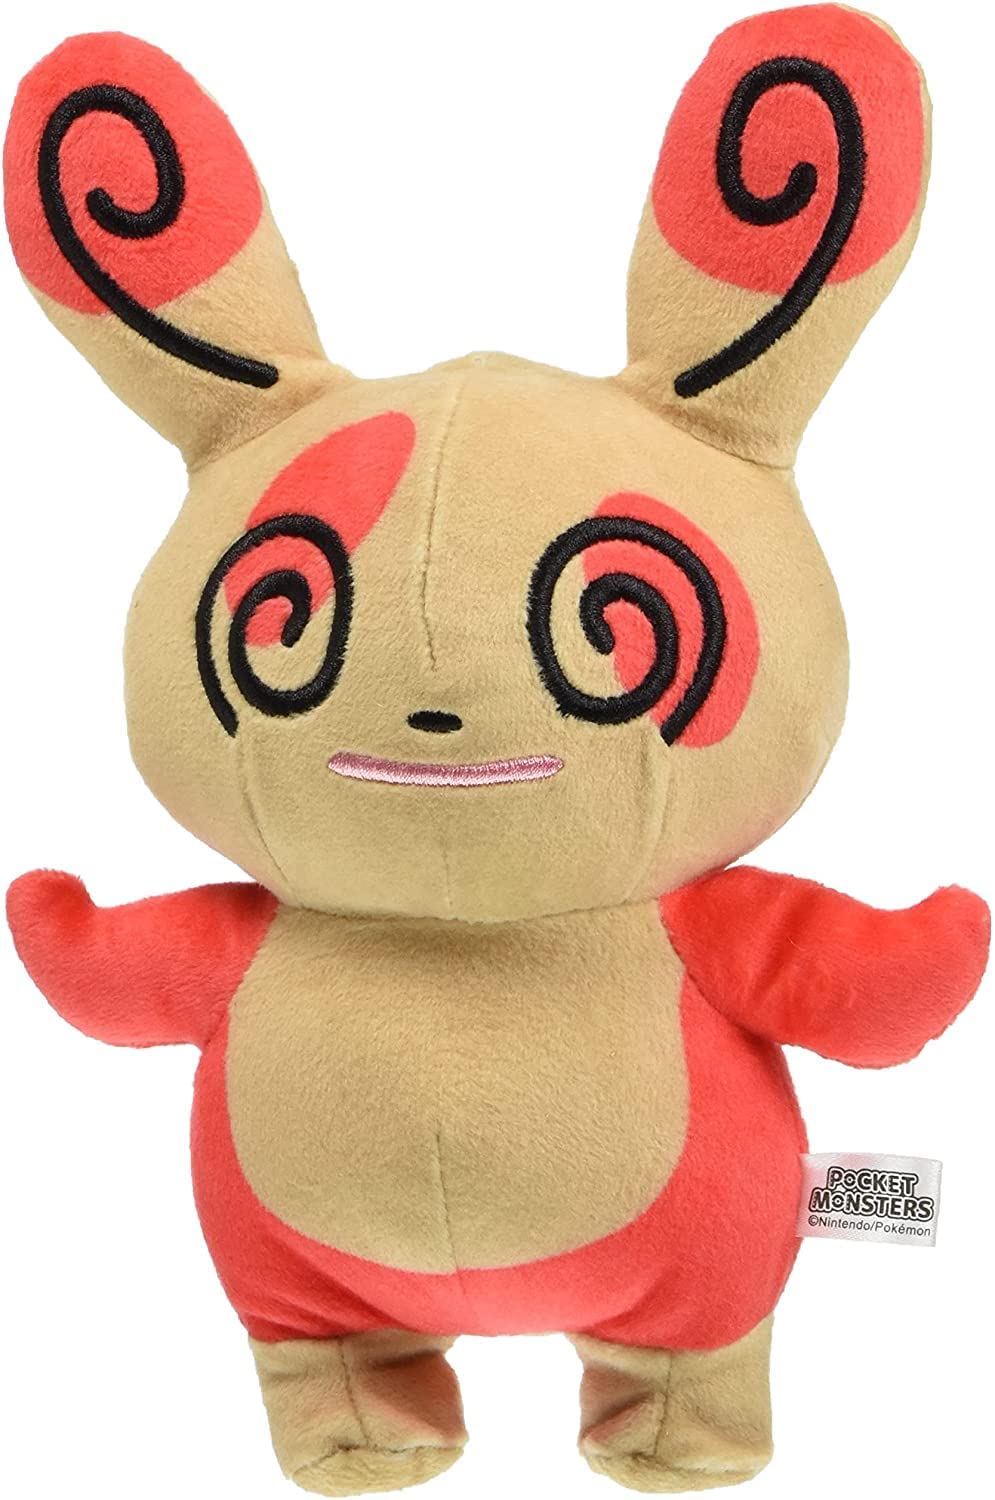 Sanei All Star Collection 8 Inch Plush - Spinda PP031